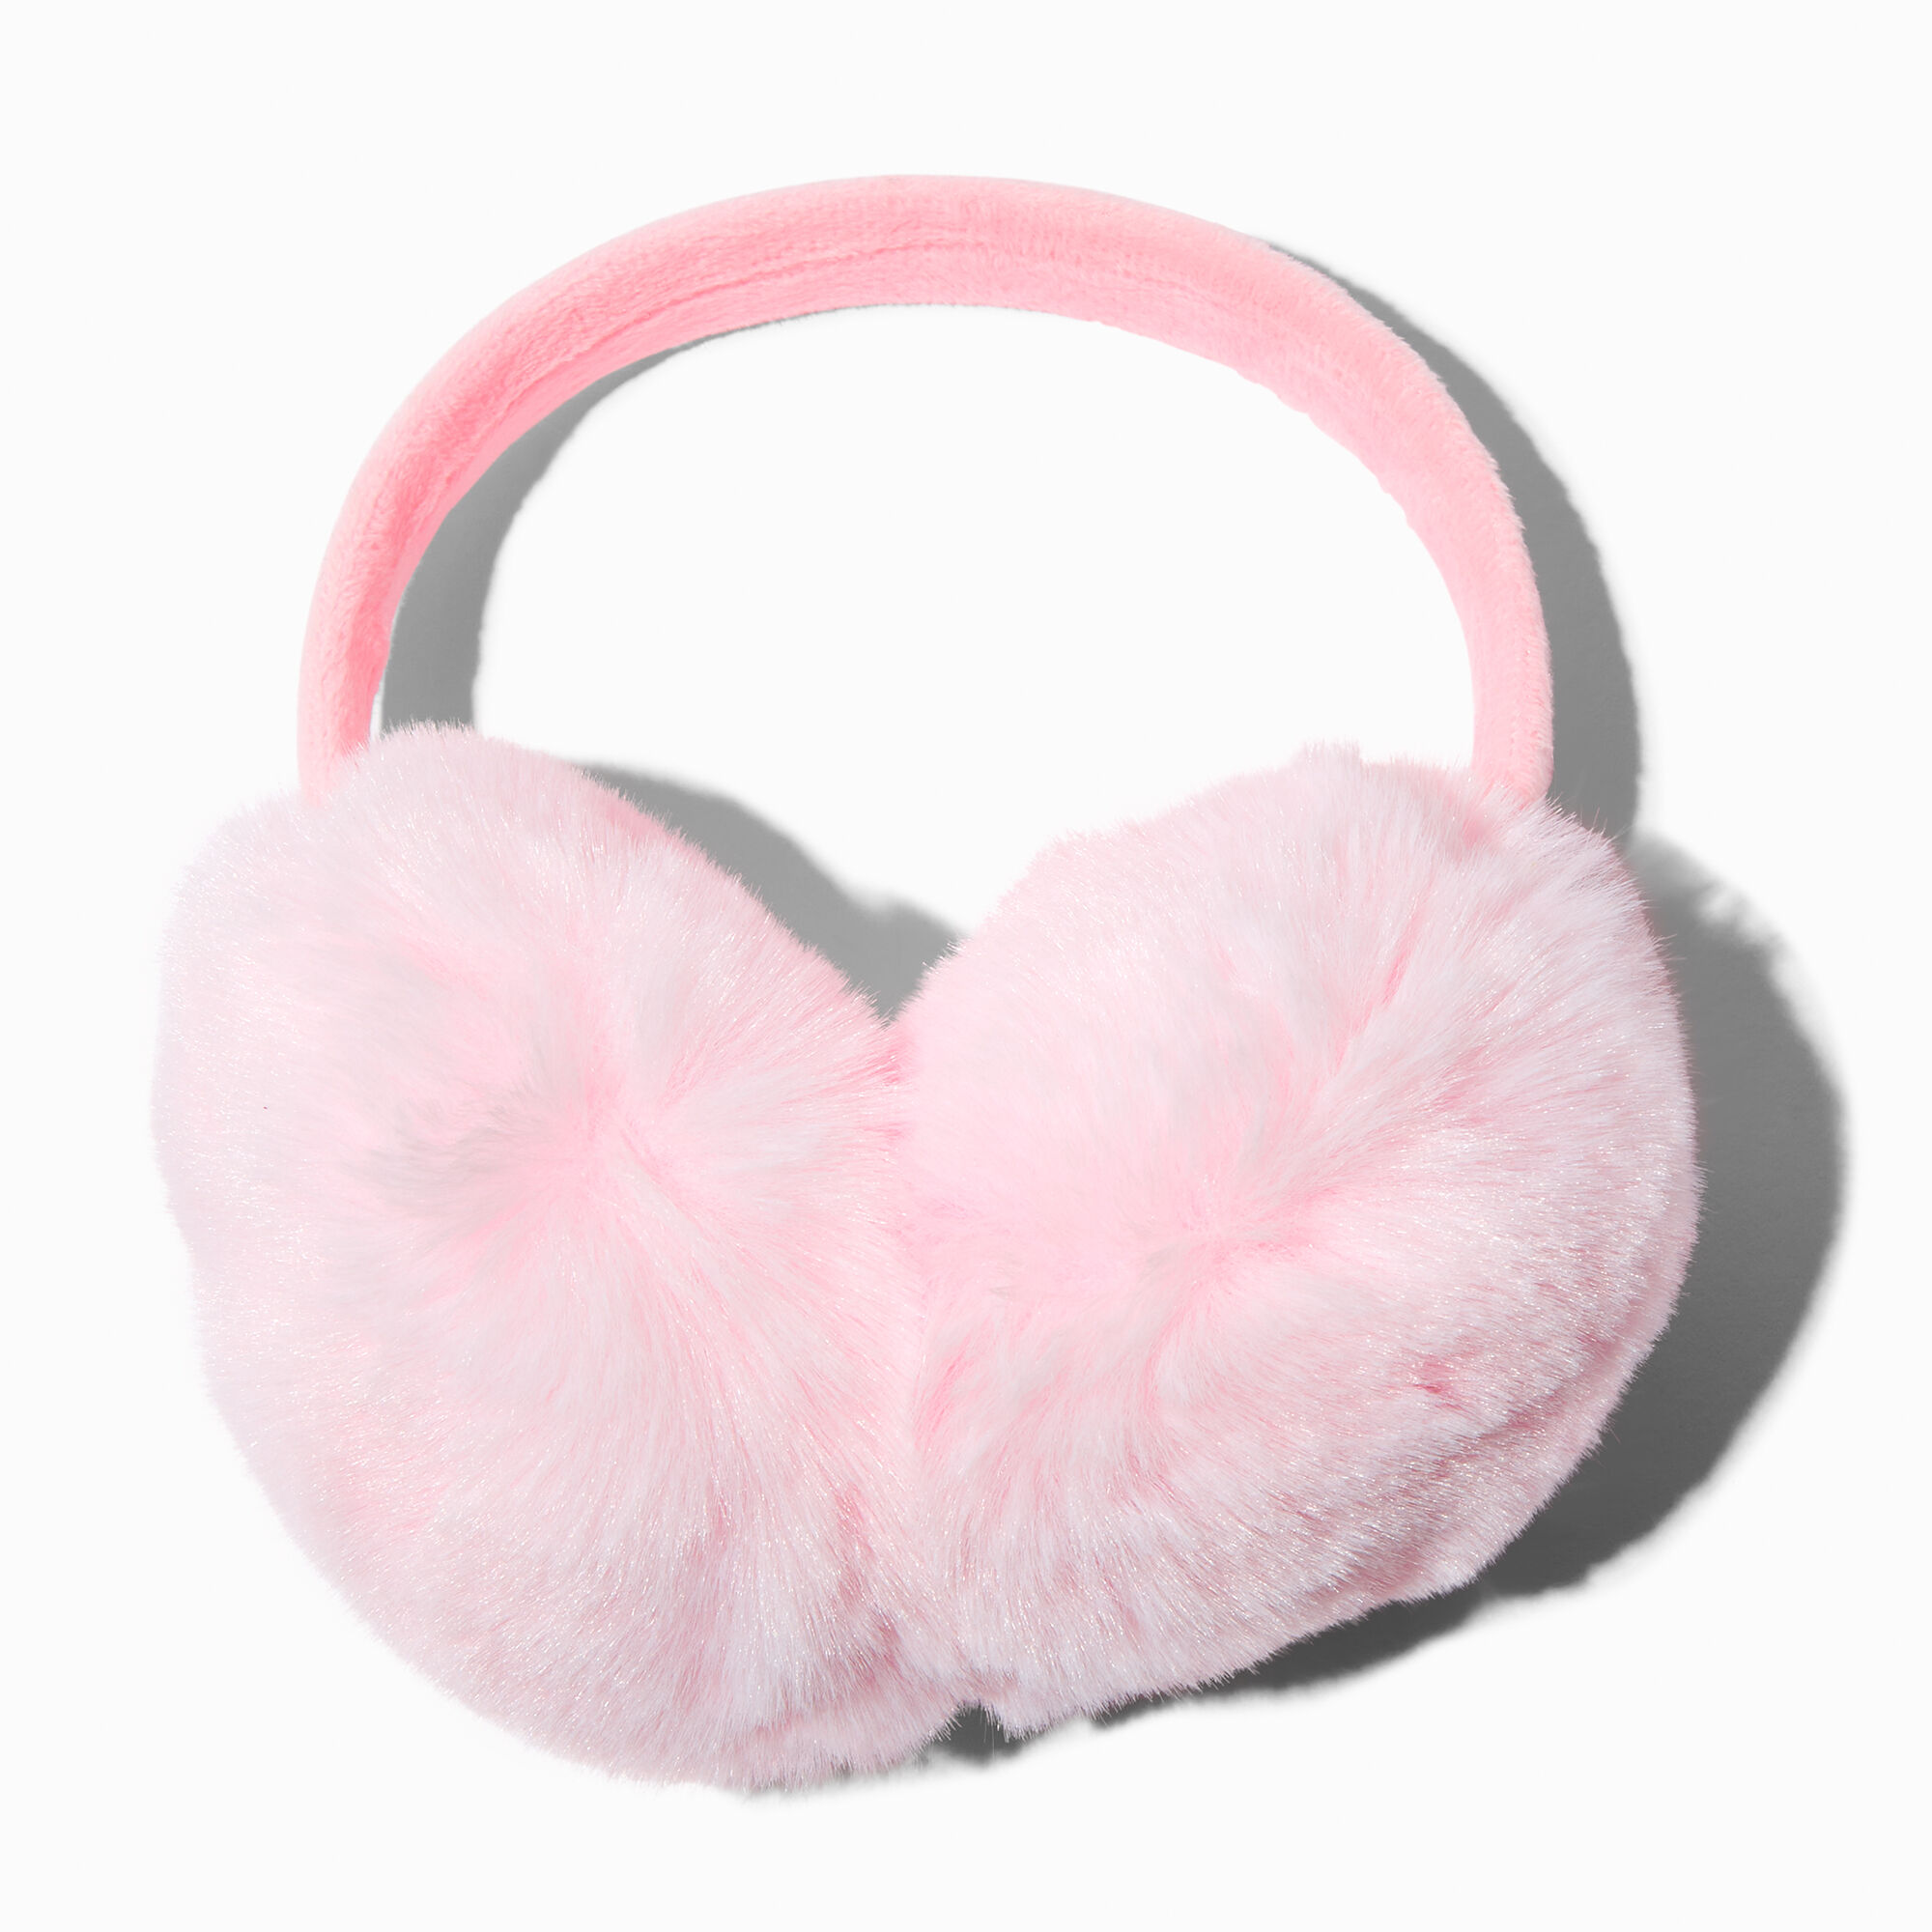 View Claires Furry Earmuffs Pink information